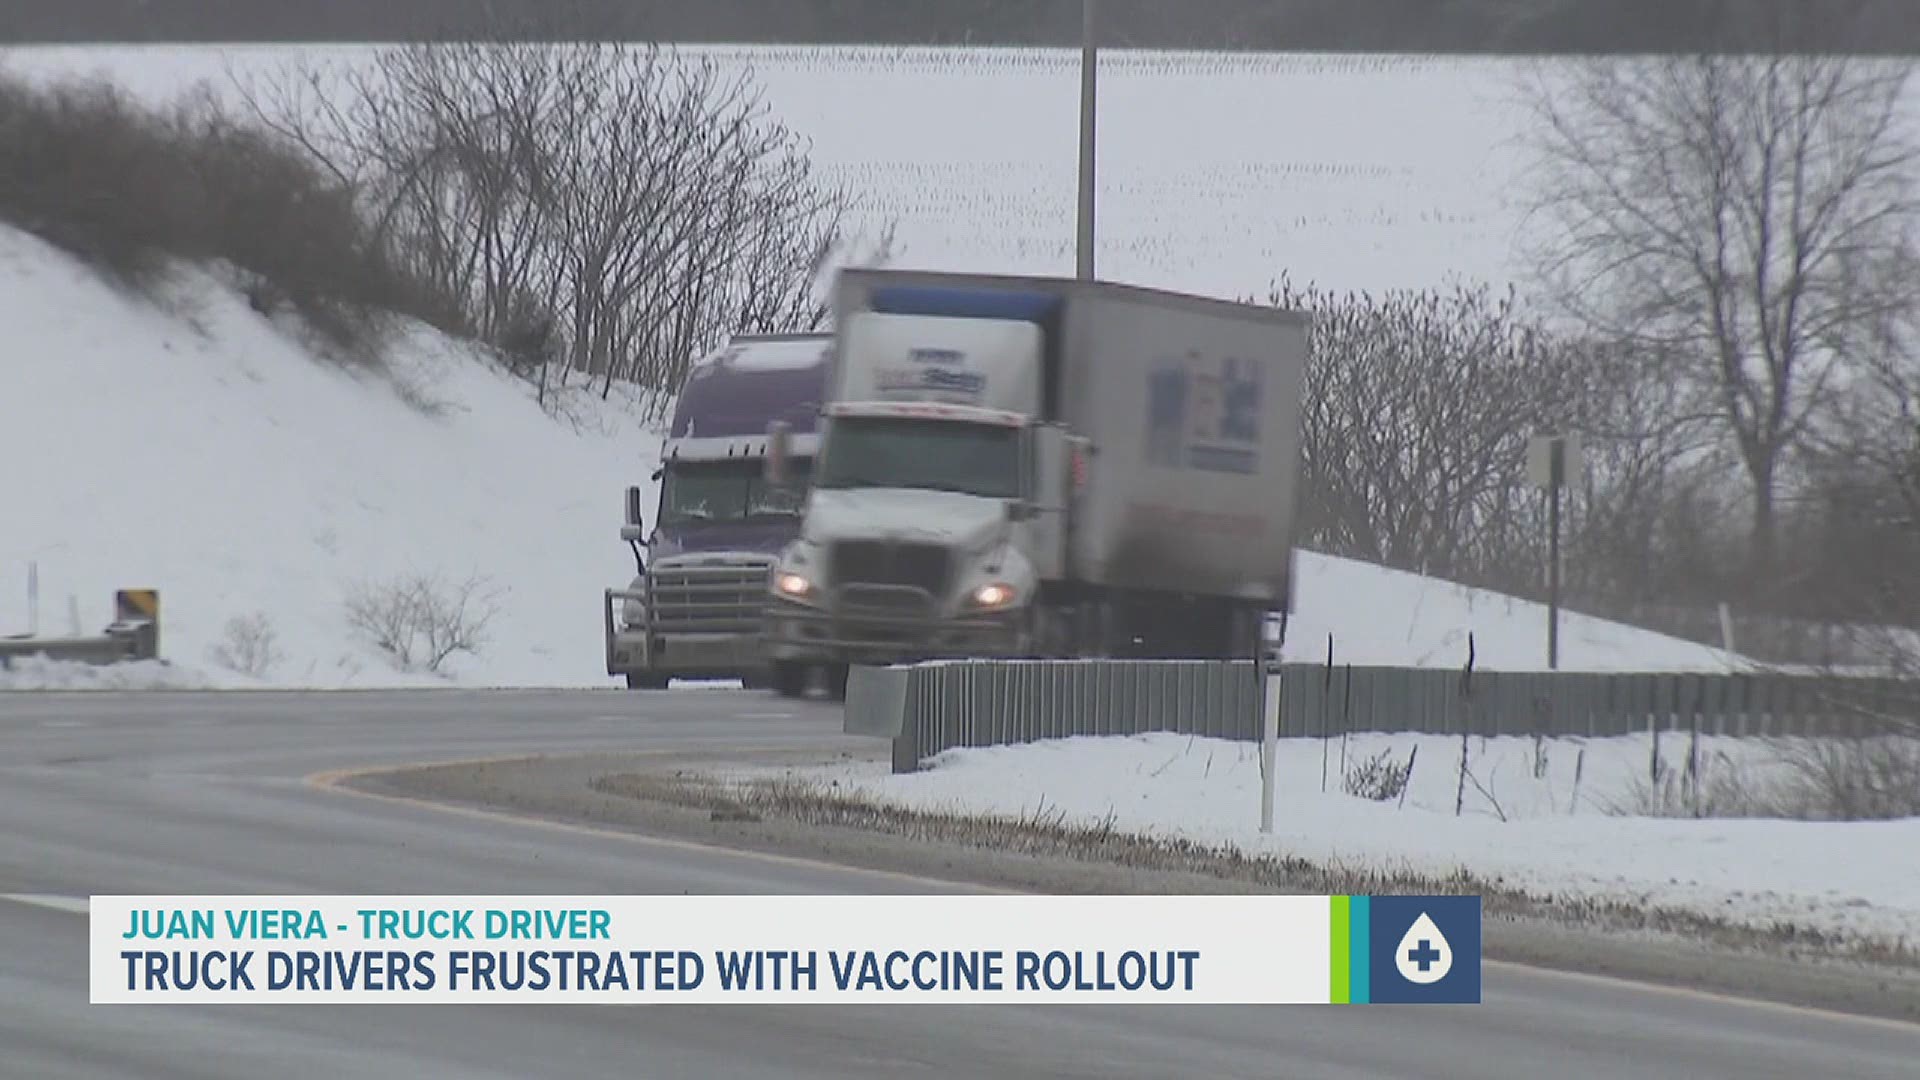 "We are out there, day in and day out, risking our lives just to keep America running. and we can't get the vaccine."